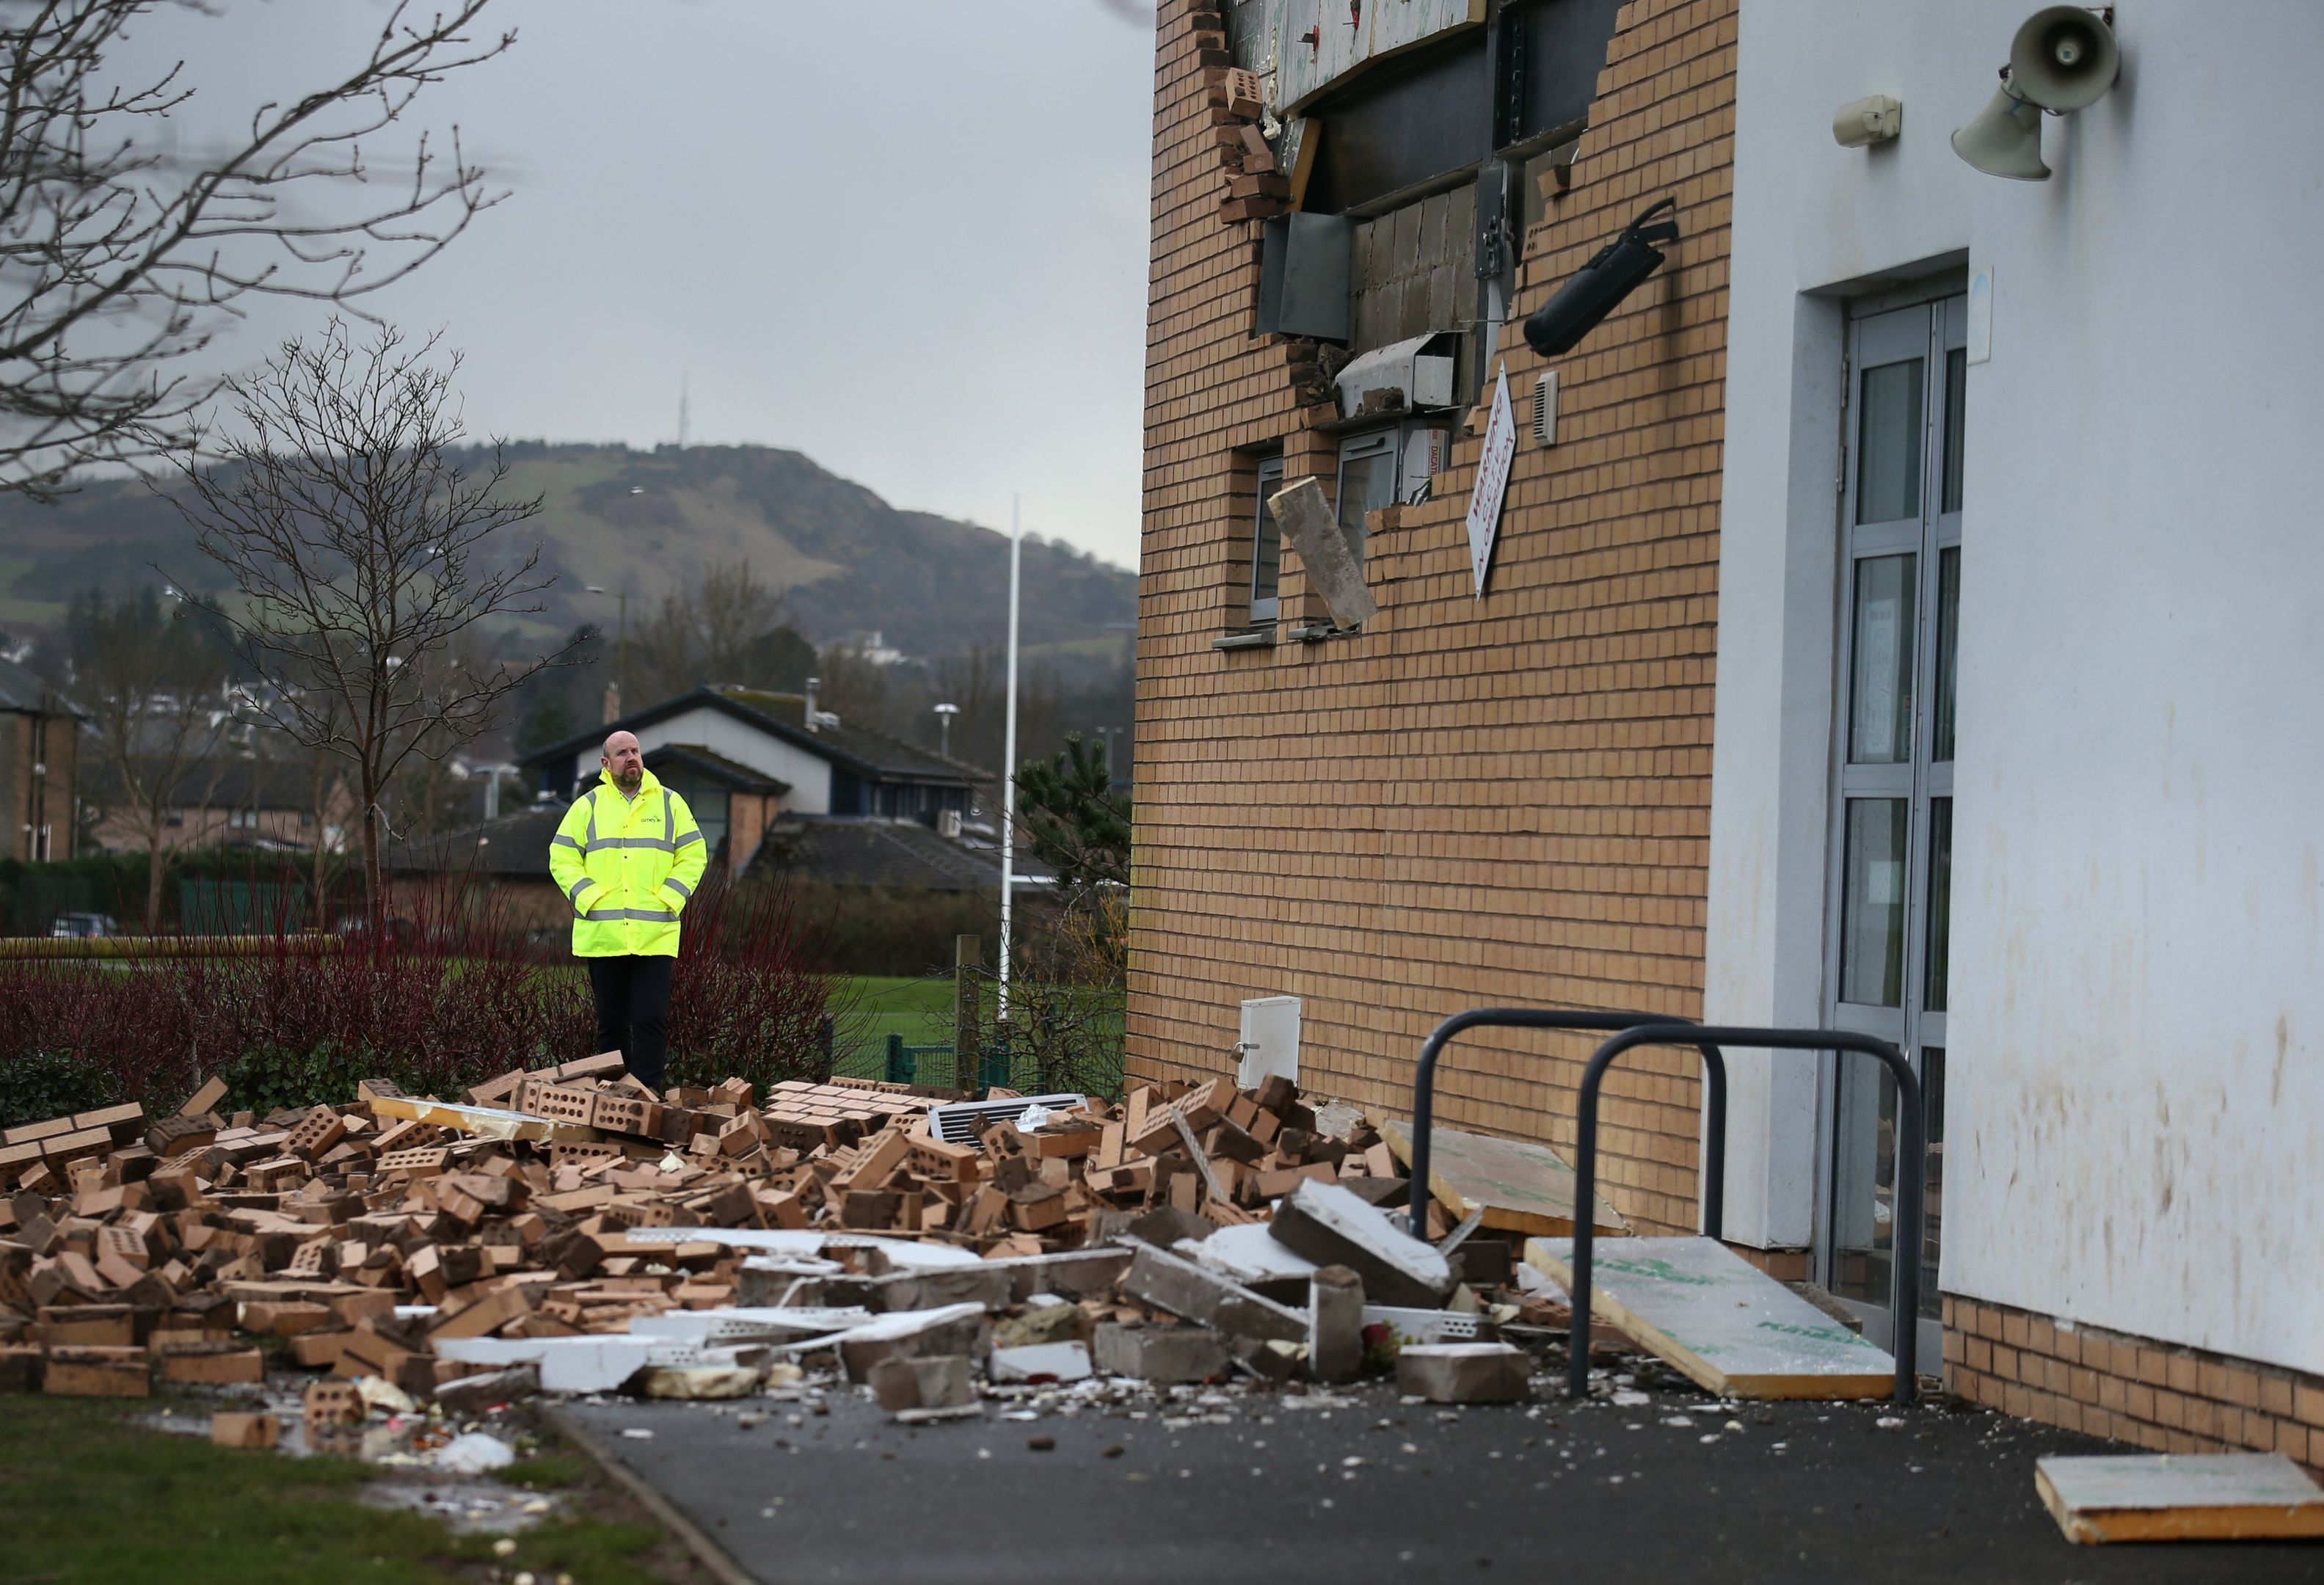 A collapsed wall at Oxgangs Primary School in Edinburgh after Storm Gertrude (Andrew Milligan / PA)